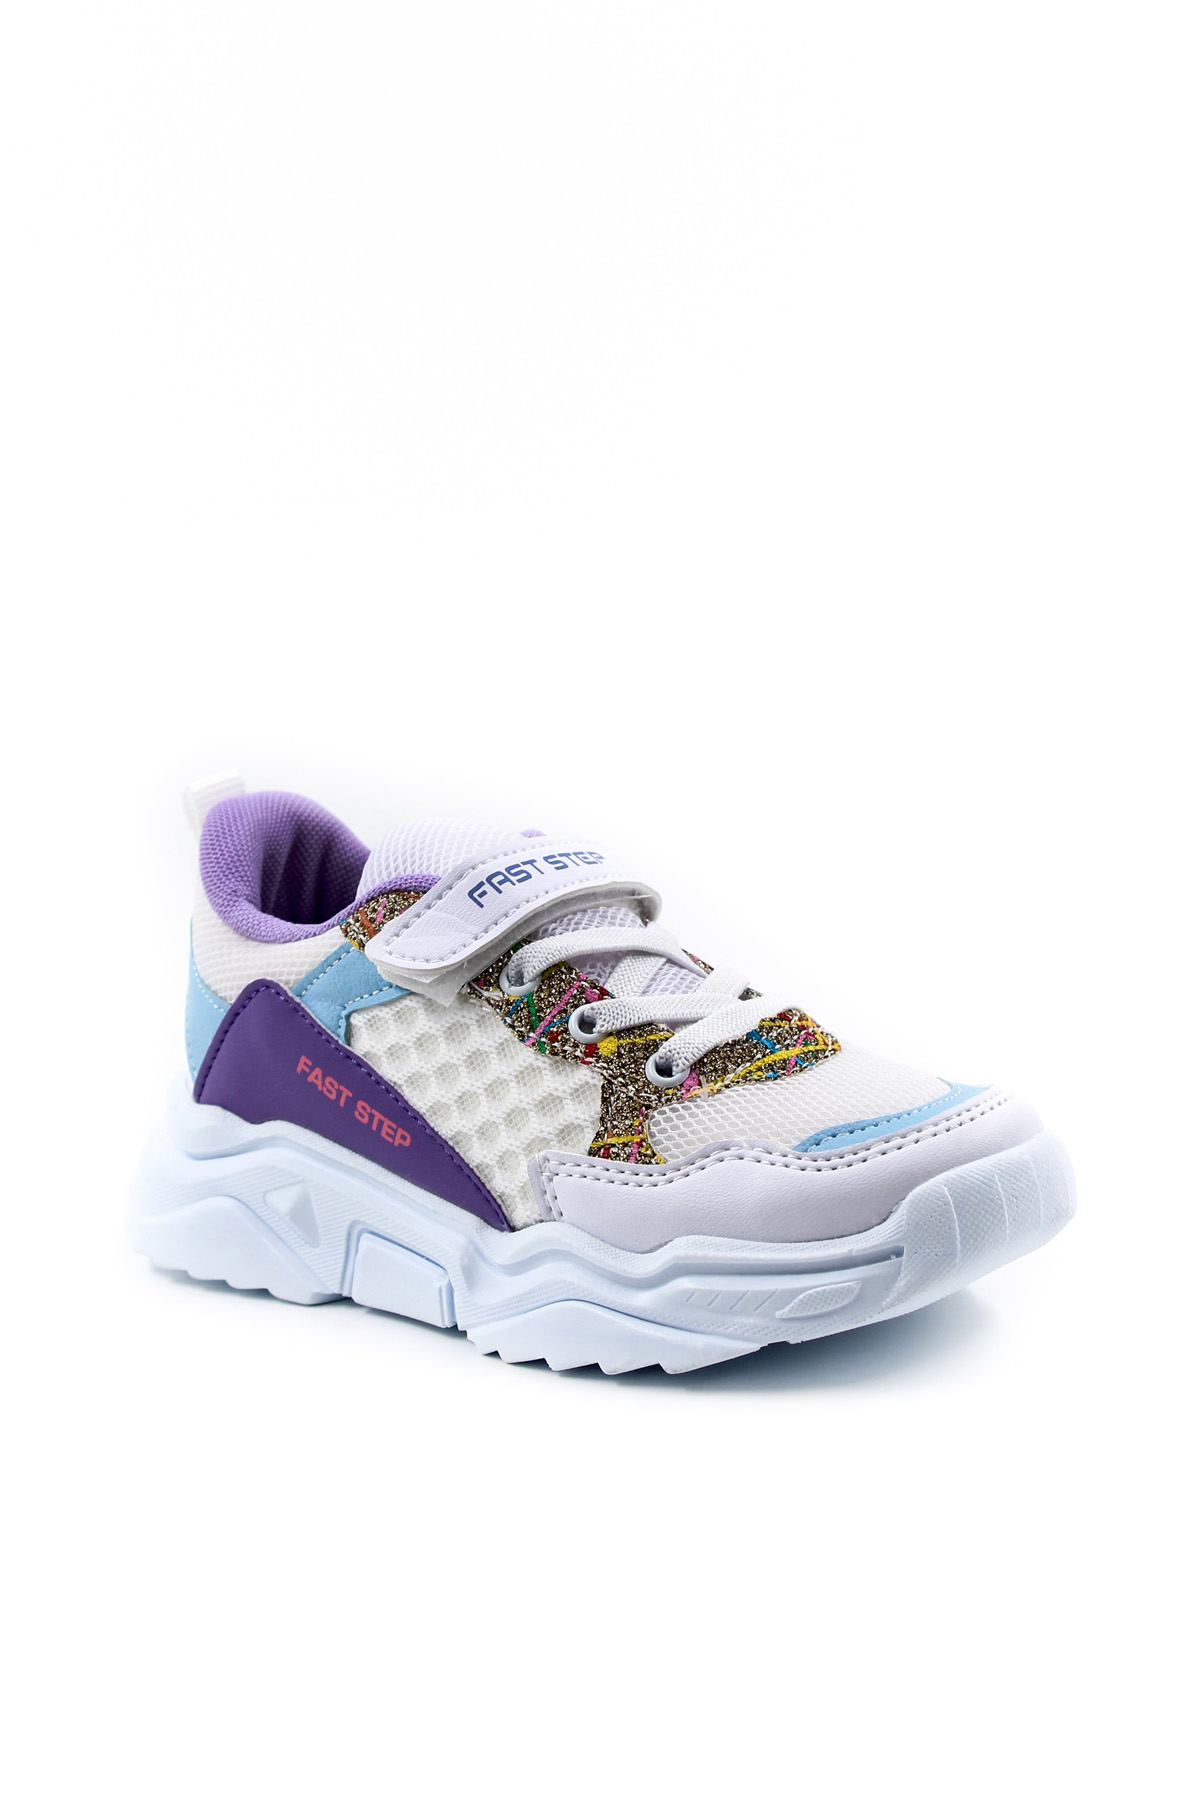 Fast Step Kids Unisex Boys Sport Shoes White Turquoise Lilac 868FA051C